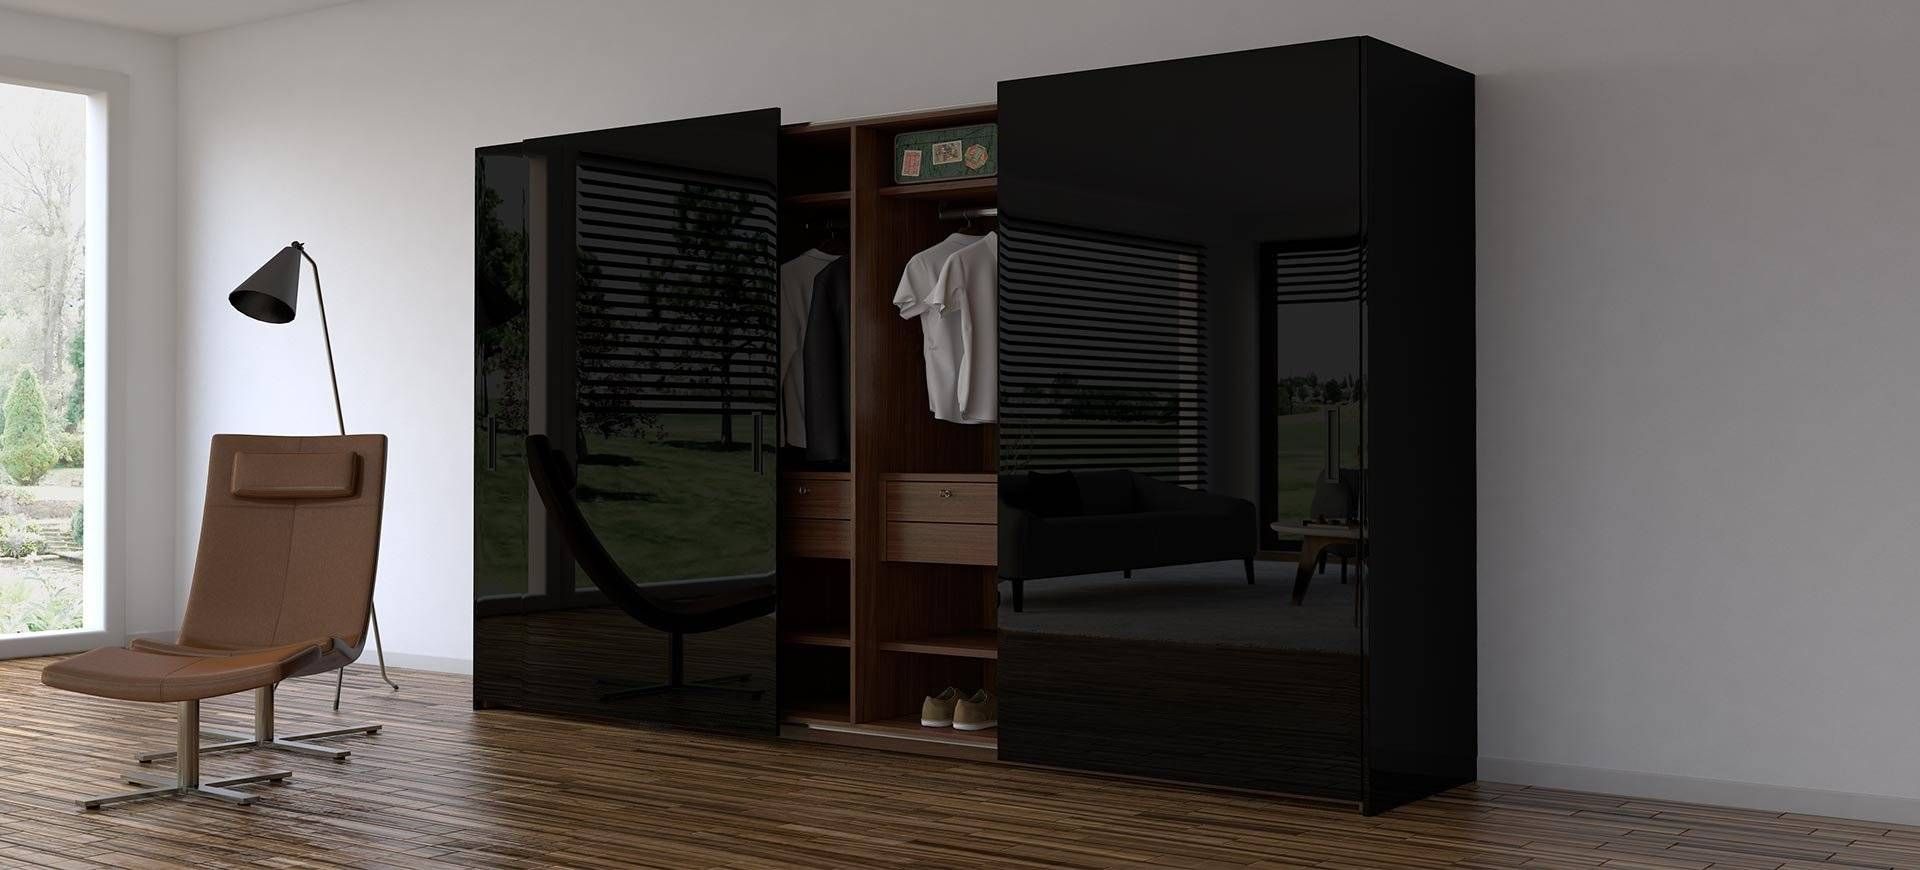 Unique Modular Wardrobessea – Sea Services Gmbh With Gloss Black Wardrobes (View 4 of 15)